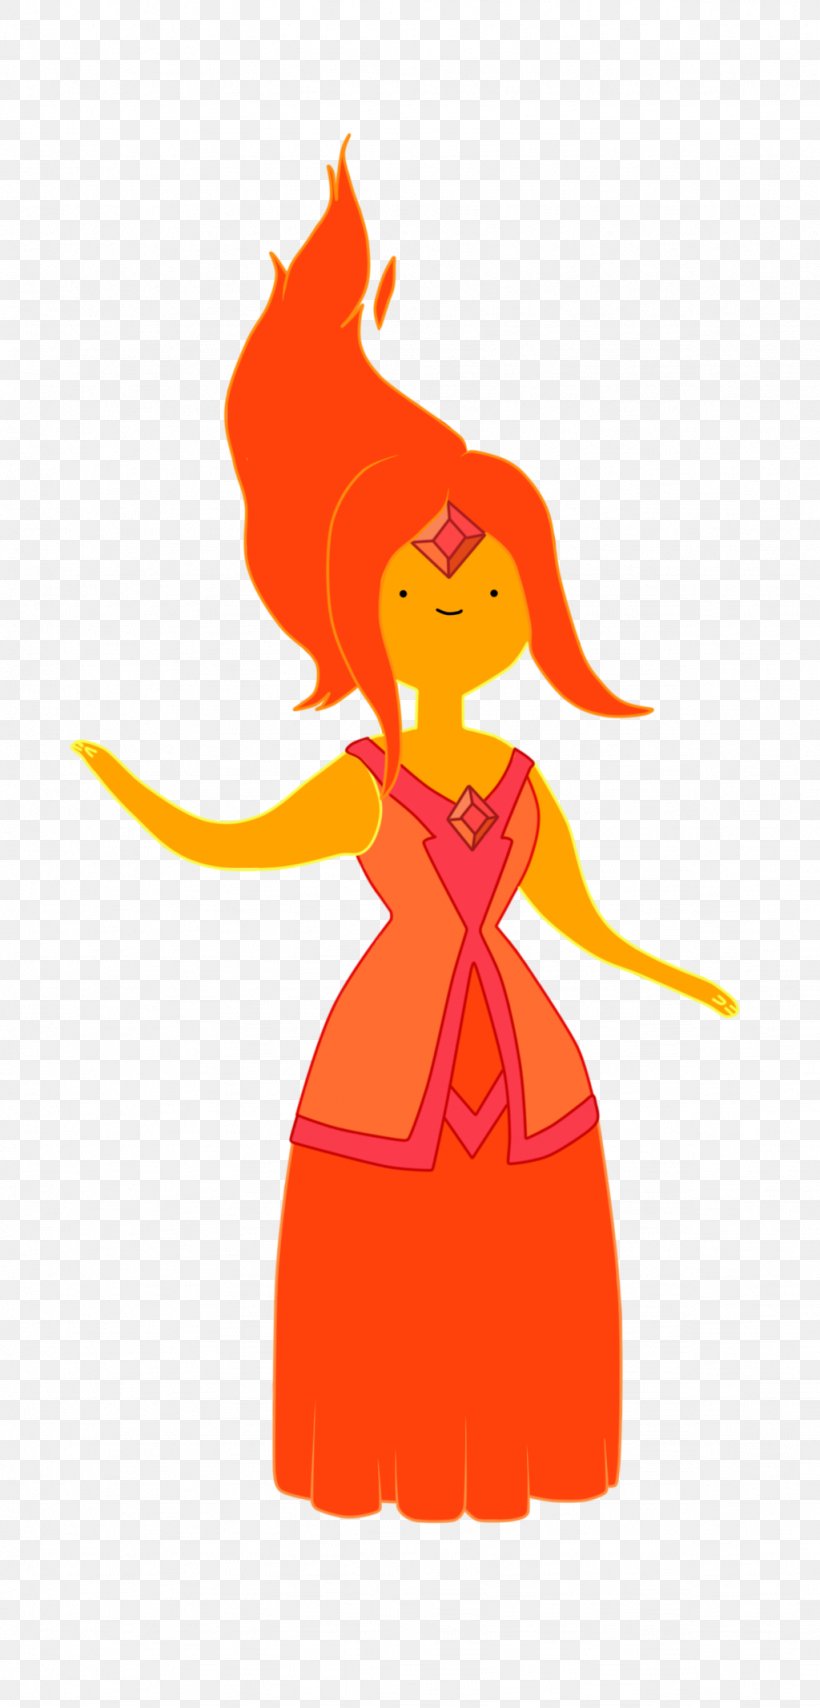 Flame Princess Marceline The Vampire Queen Finn The Human Adventure Time: Explore The Dungeon Because I Don't Know! Jake The Dog, PNG, 1024x2133px, Flame Princess, Adventure, Adventure Time, Art, Cartoon Download Free